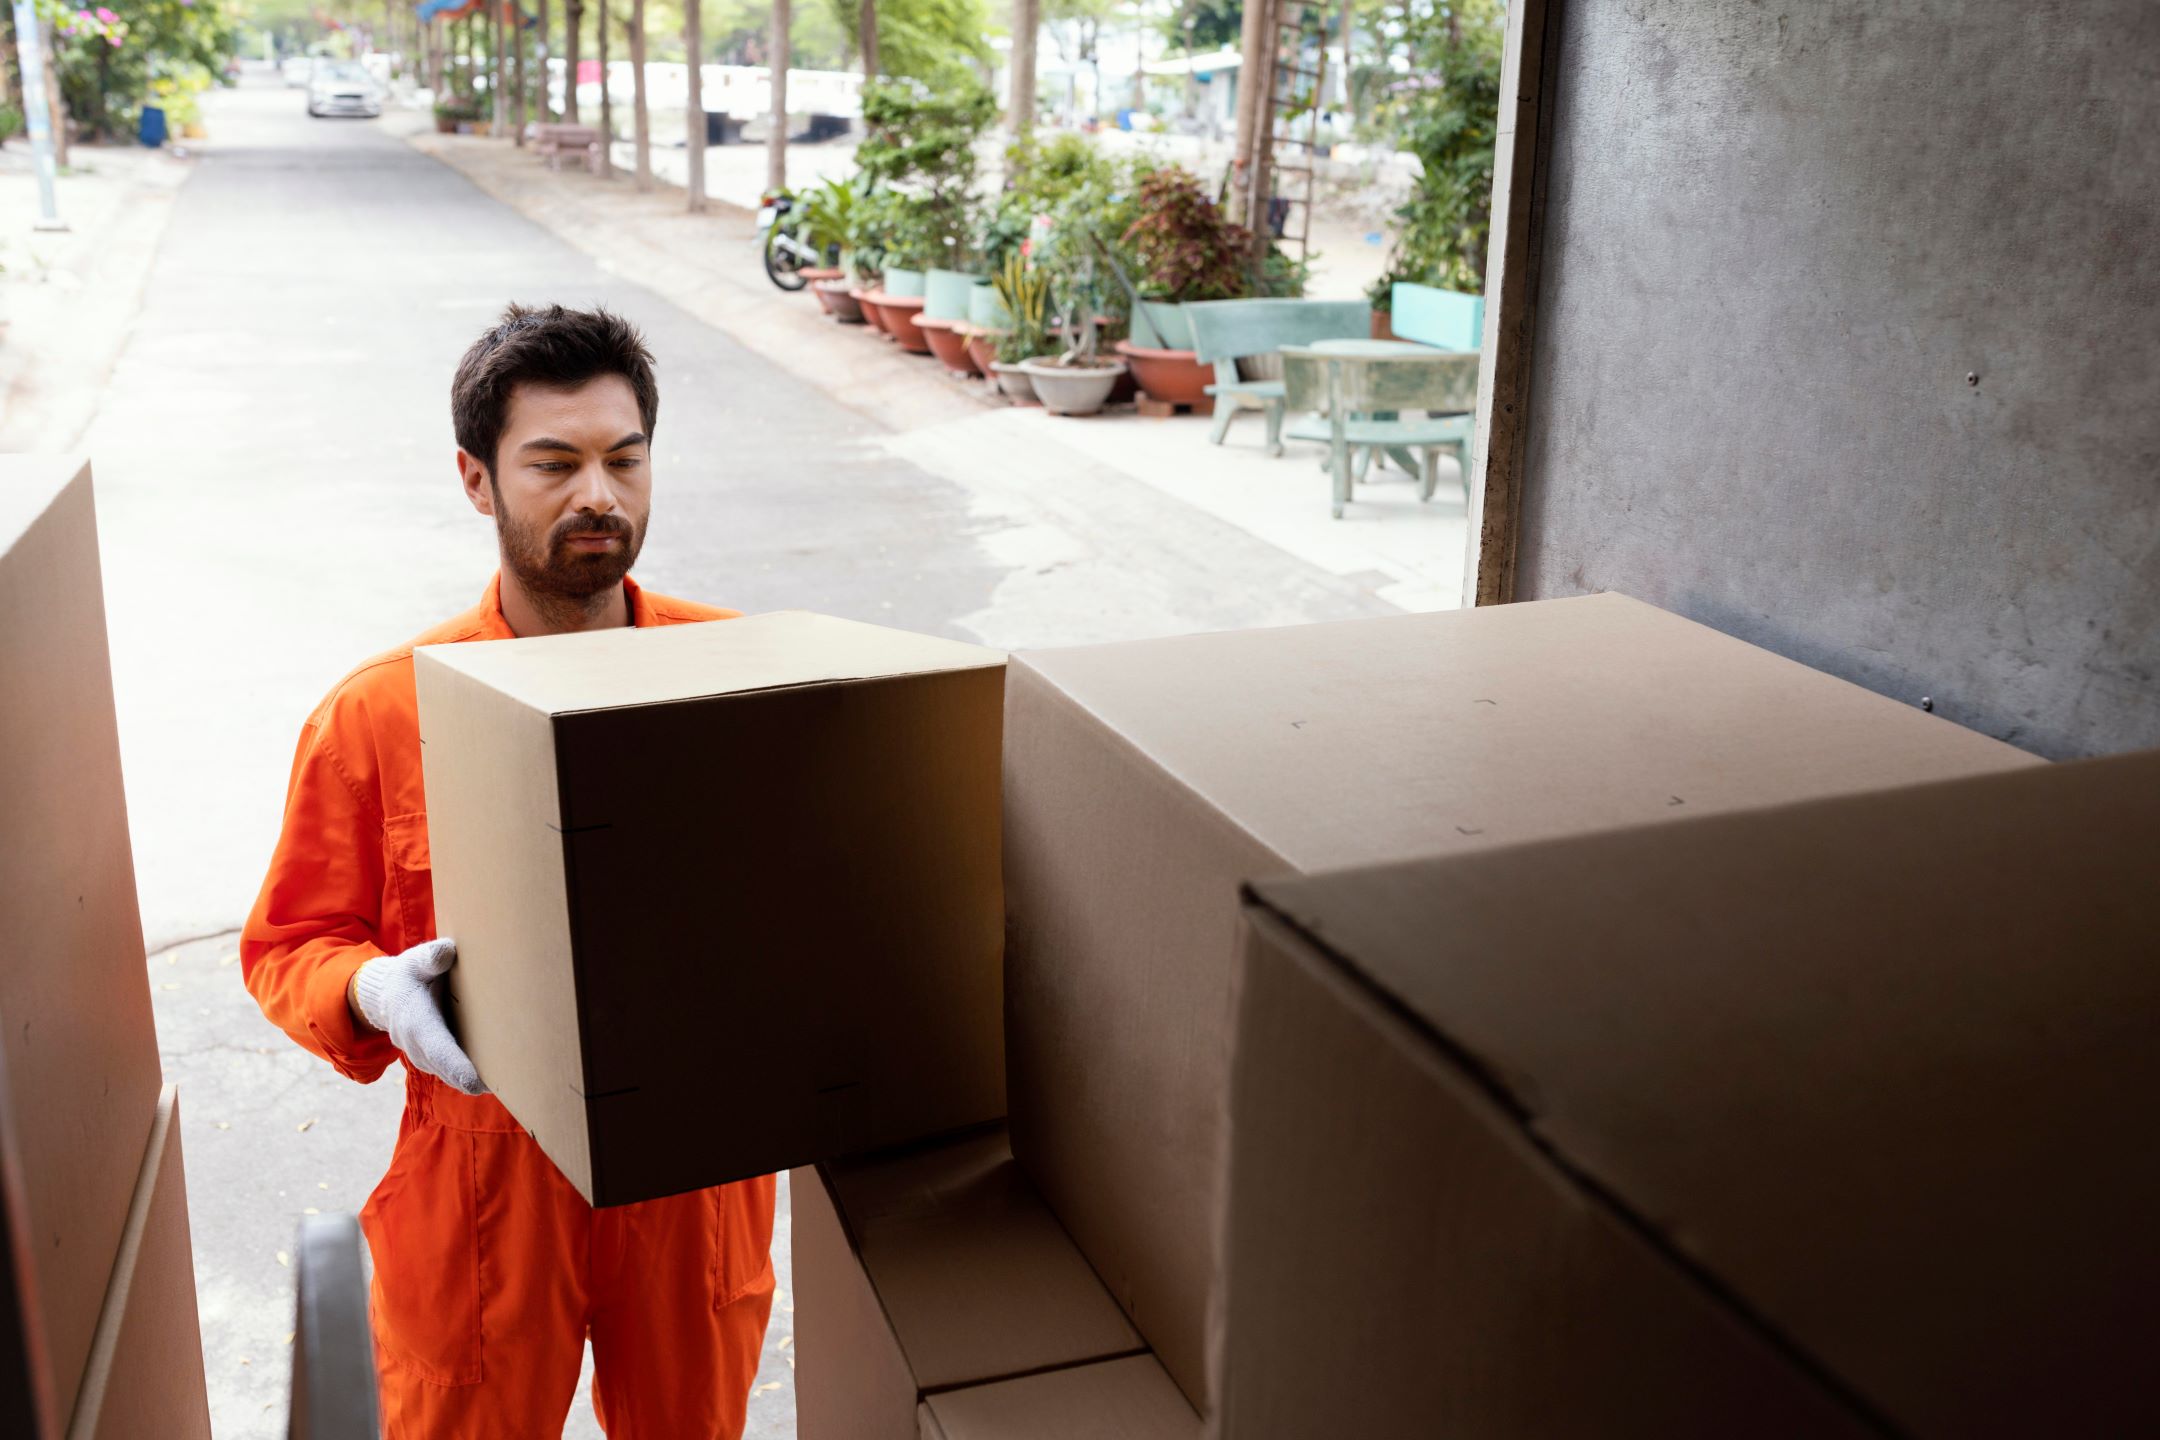 Streamlining Your Move: Residential Moving, Storage, and Professional Packing Services